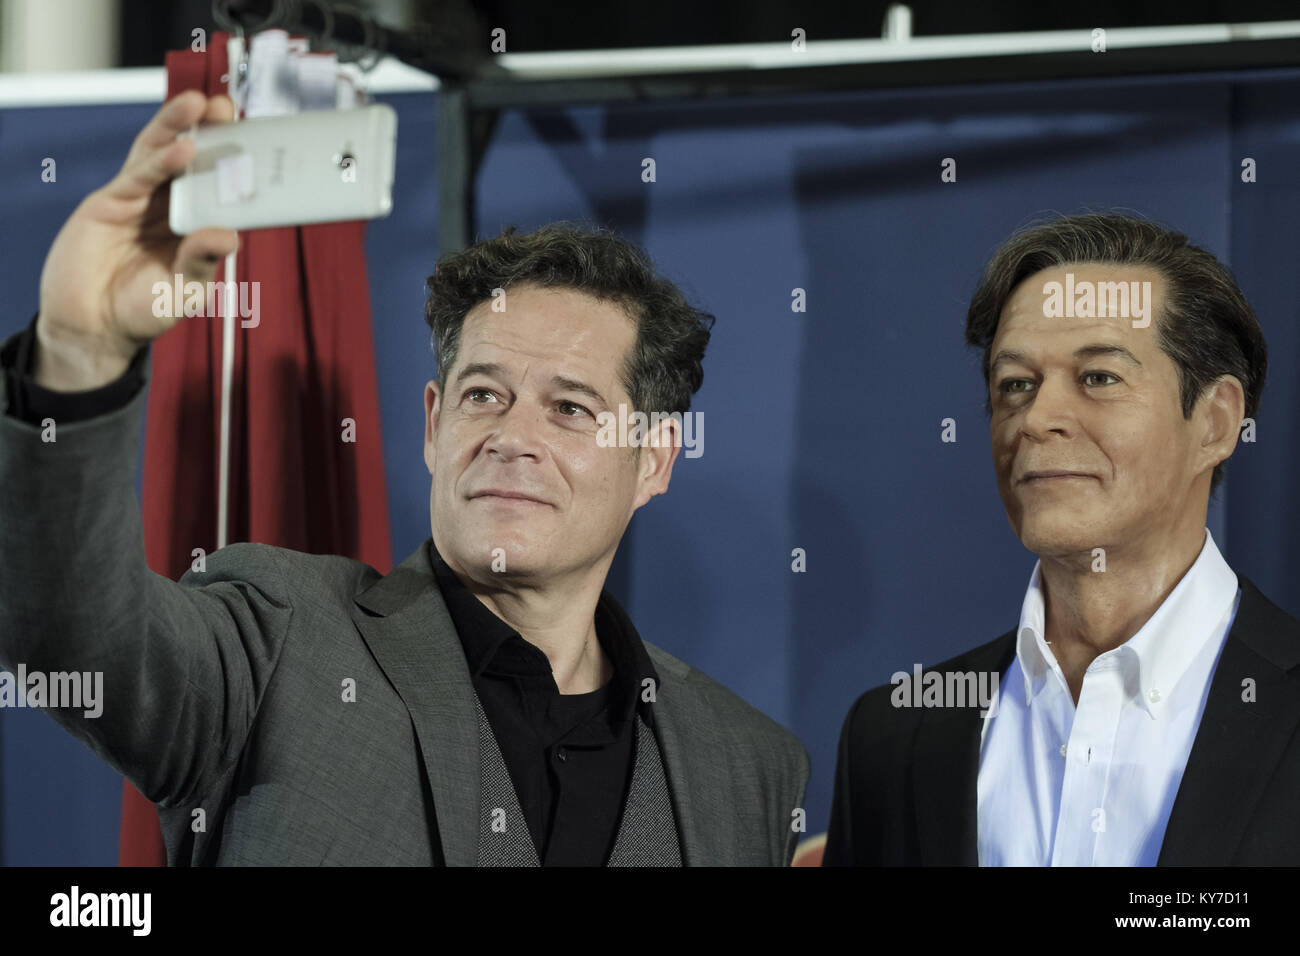 Spanish actor Jorge Sanz unveils his wax figure at the Wax Museum in Madrid, Spain  Featuring: Jorge Sanz Where: Madrid, Spain When: 13 Dec 2017 Credit: Oscar Gonzalez/WENN.com Stock Photo